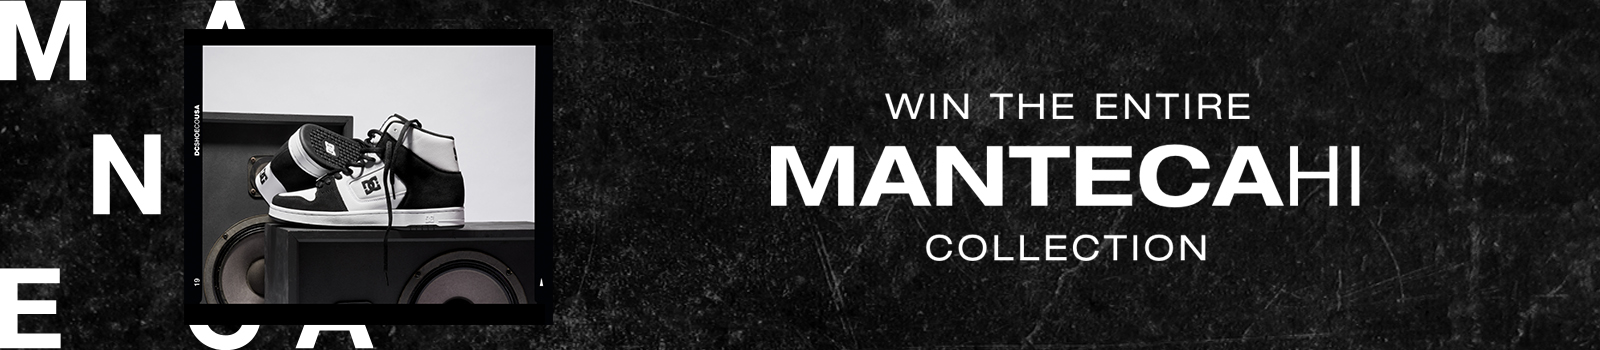 Enter to win the DC Manteca Hi entire collection